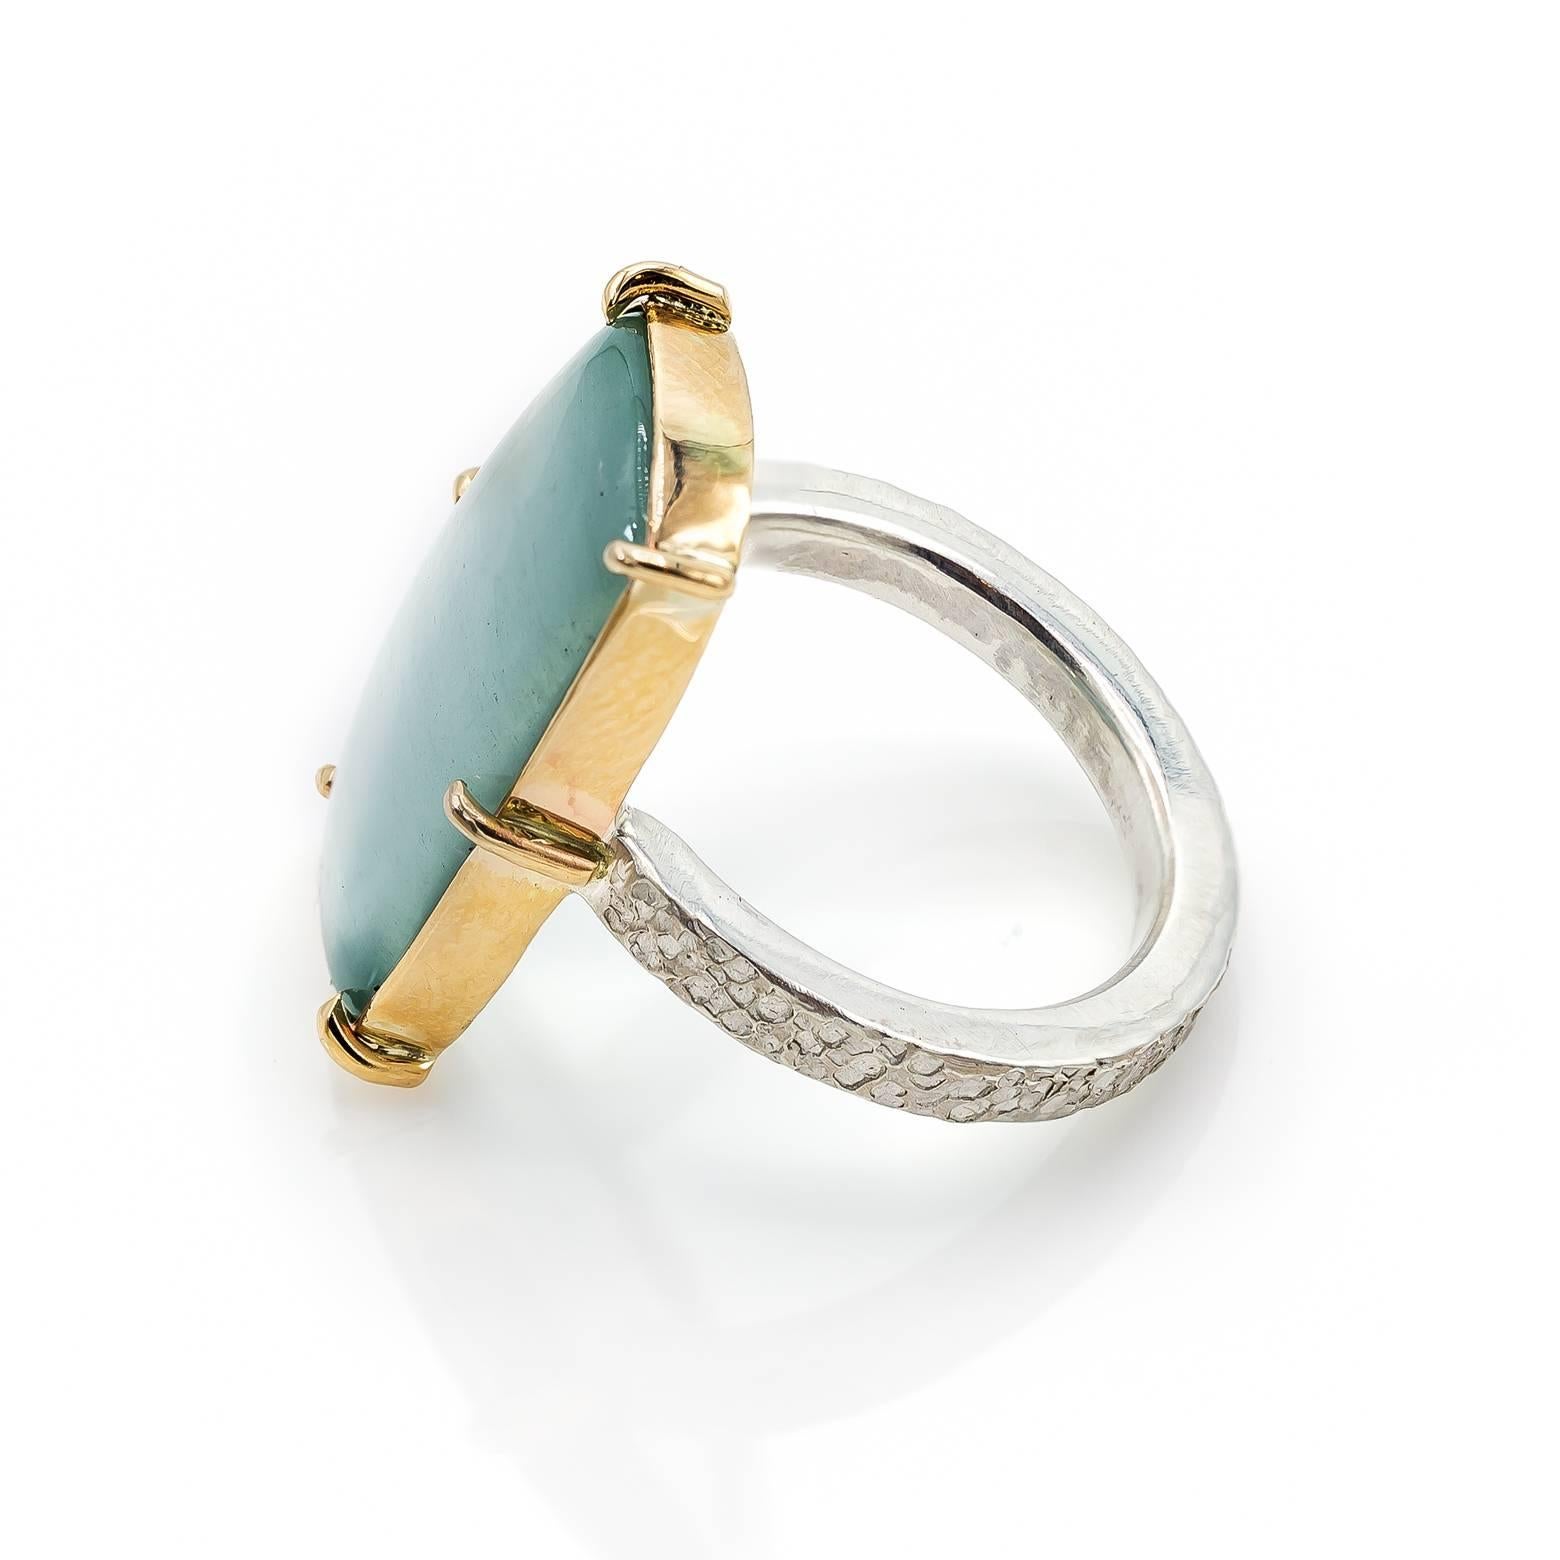 This two-toned ring is a beautiful statement ring made with a rare Cats Eye Aquamarine center stone in a slightly rounded rectangle shape. The 14K yellow gold bezel beautifully embellish the aquamarine and the band is a light white sterling silver